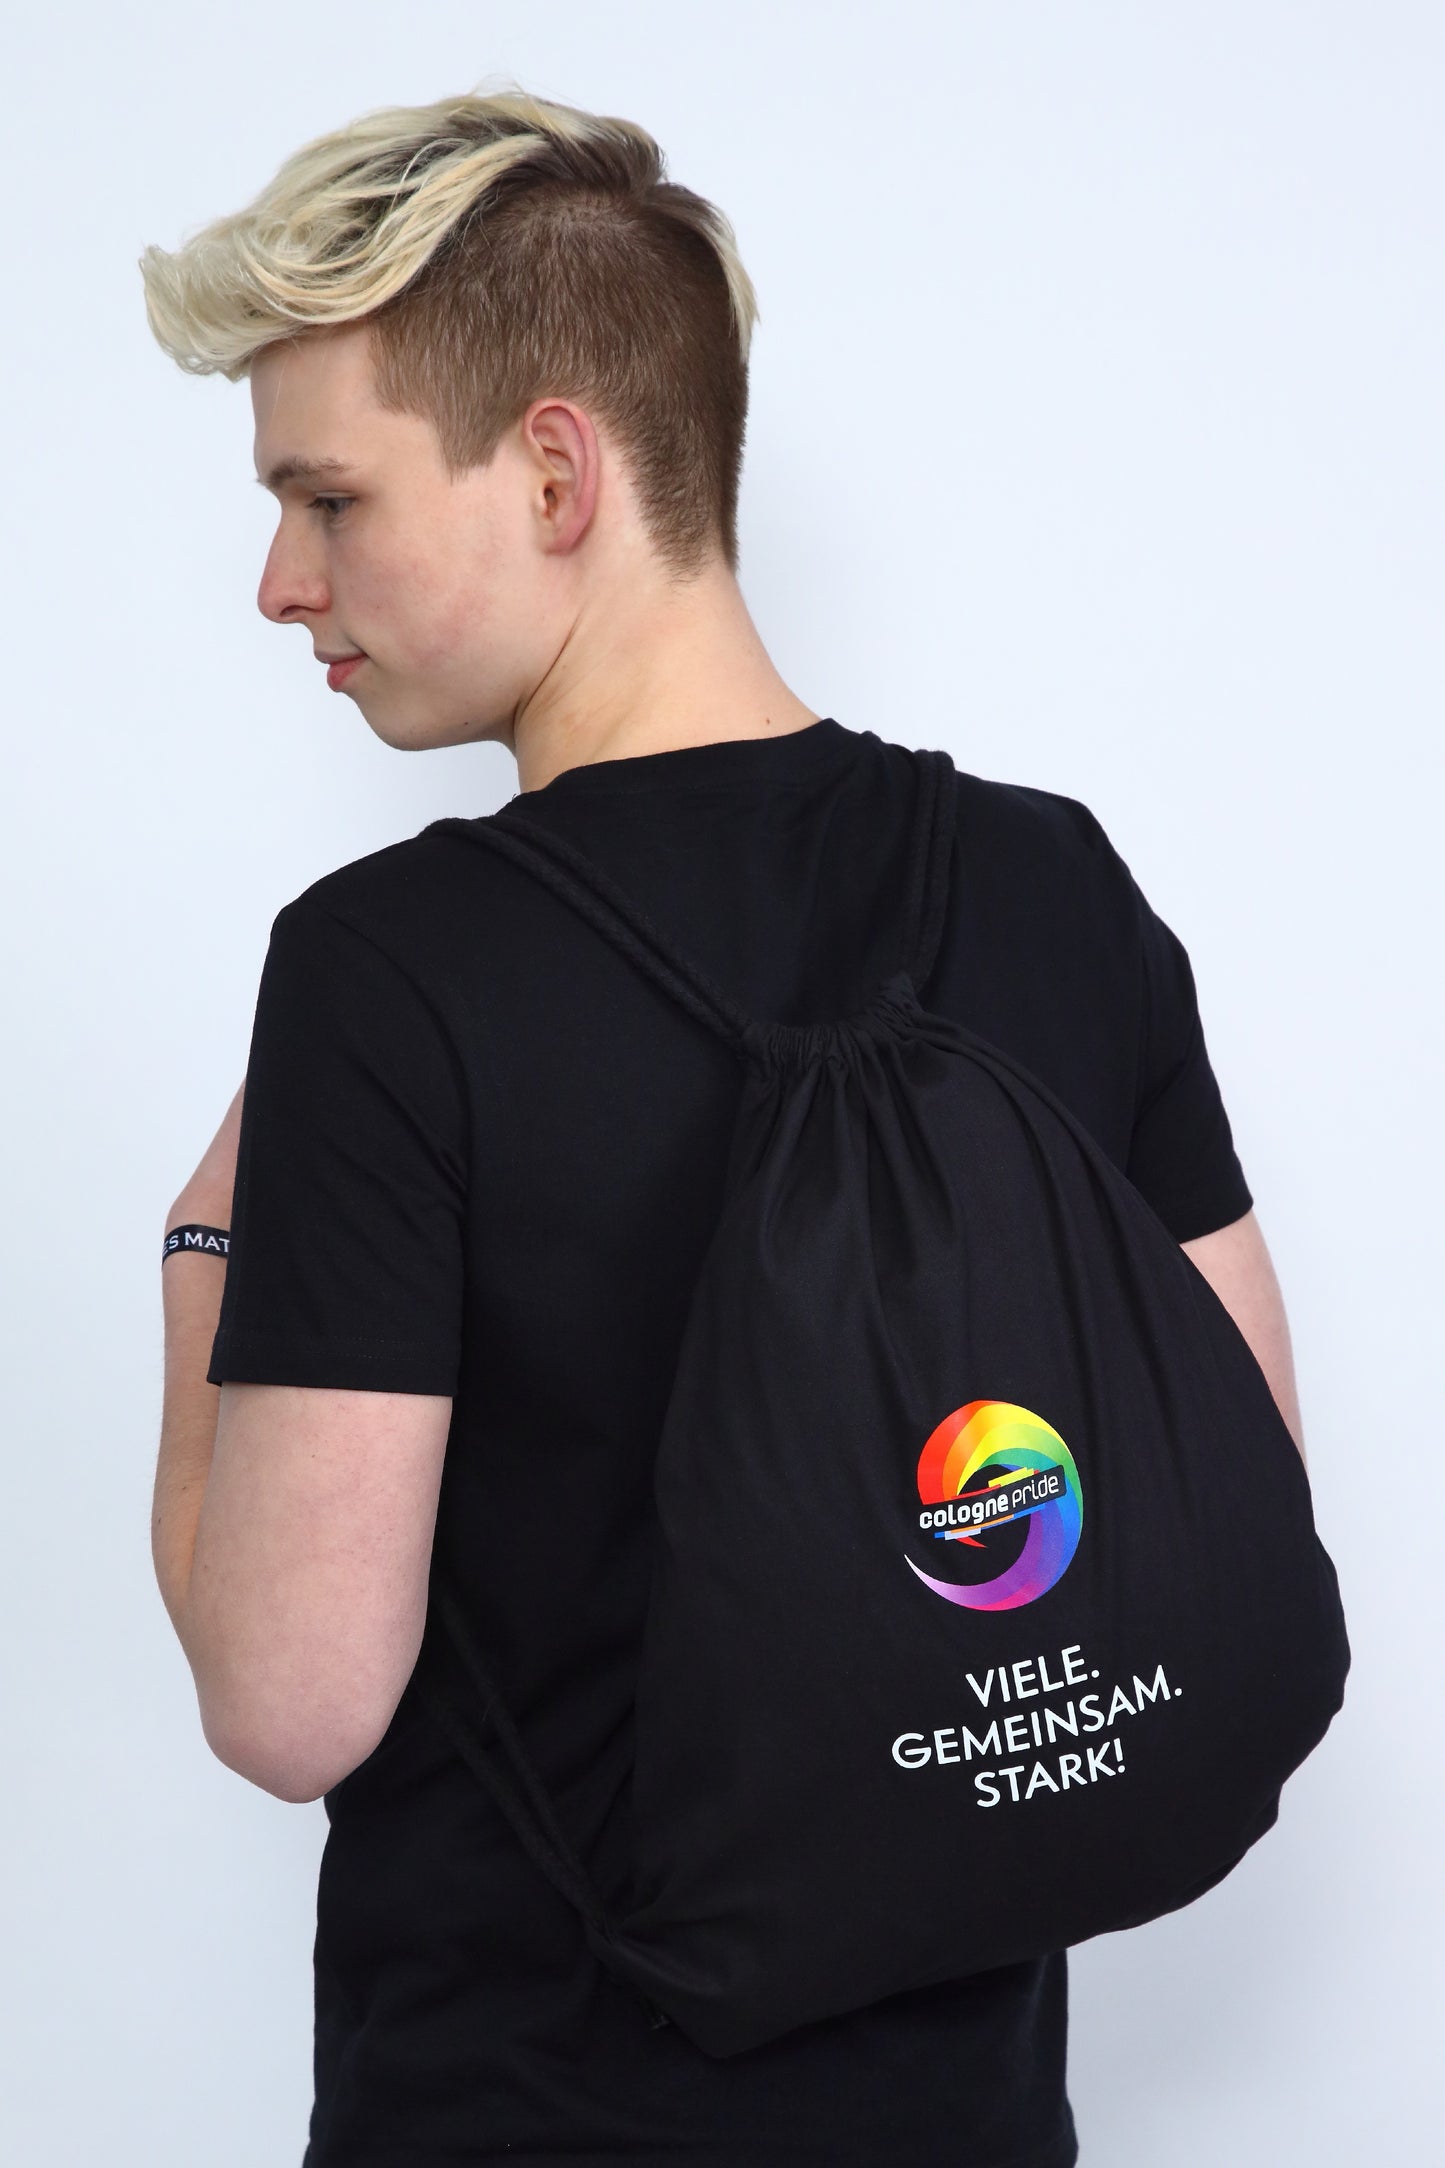 Gymbag "ColognePride"